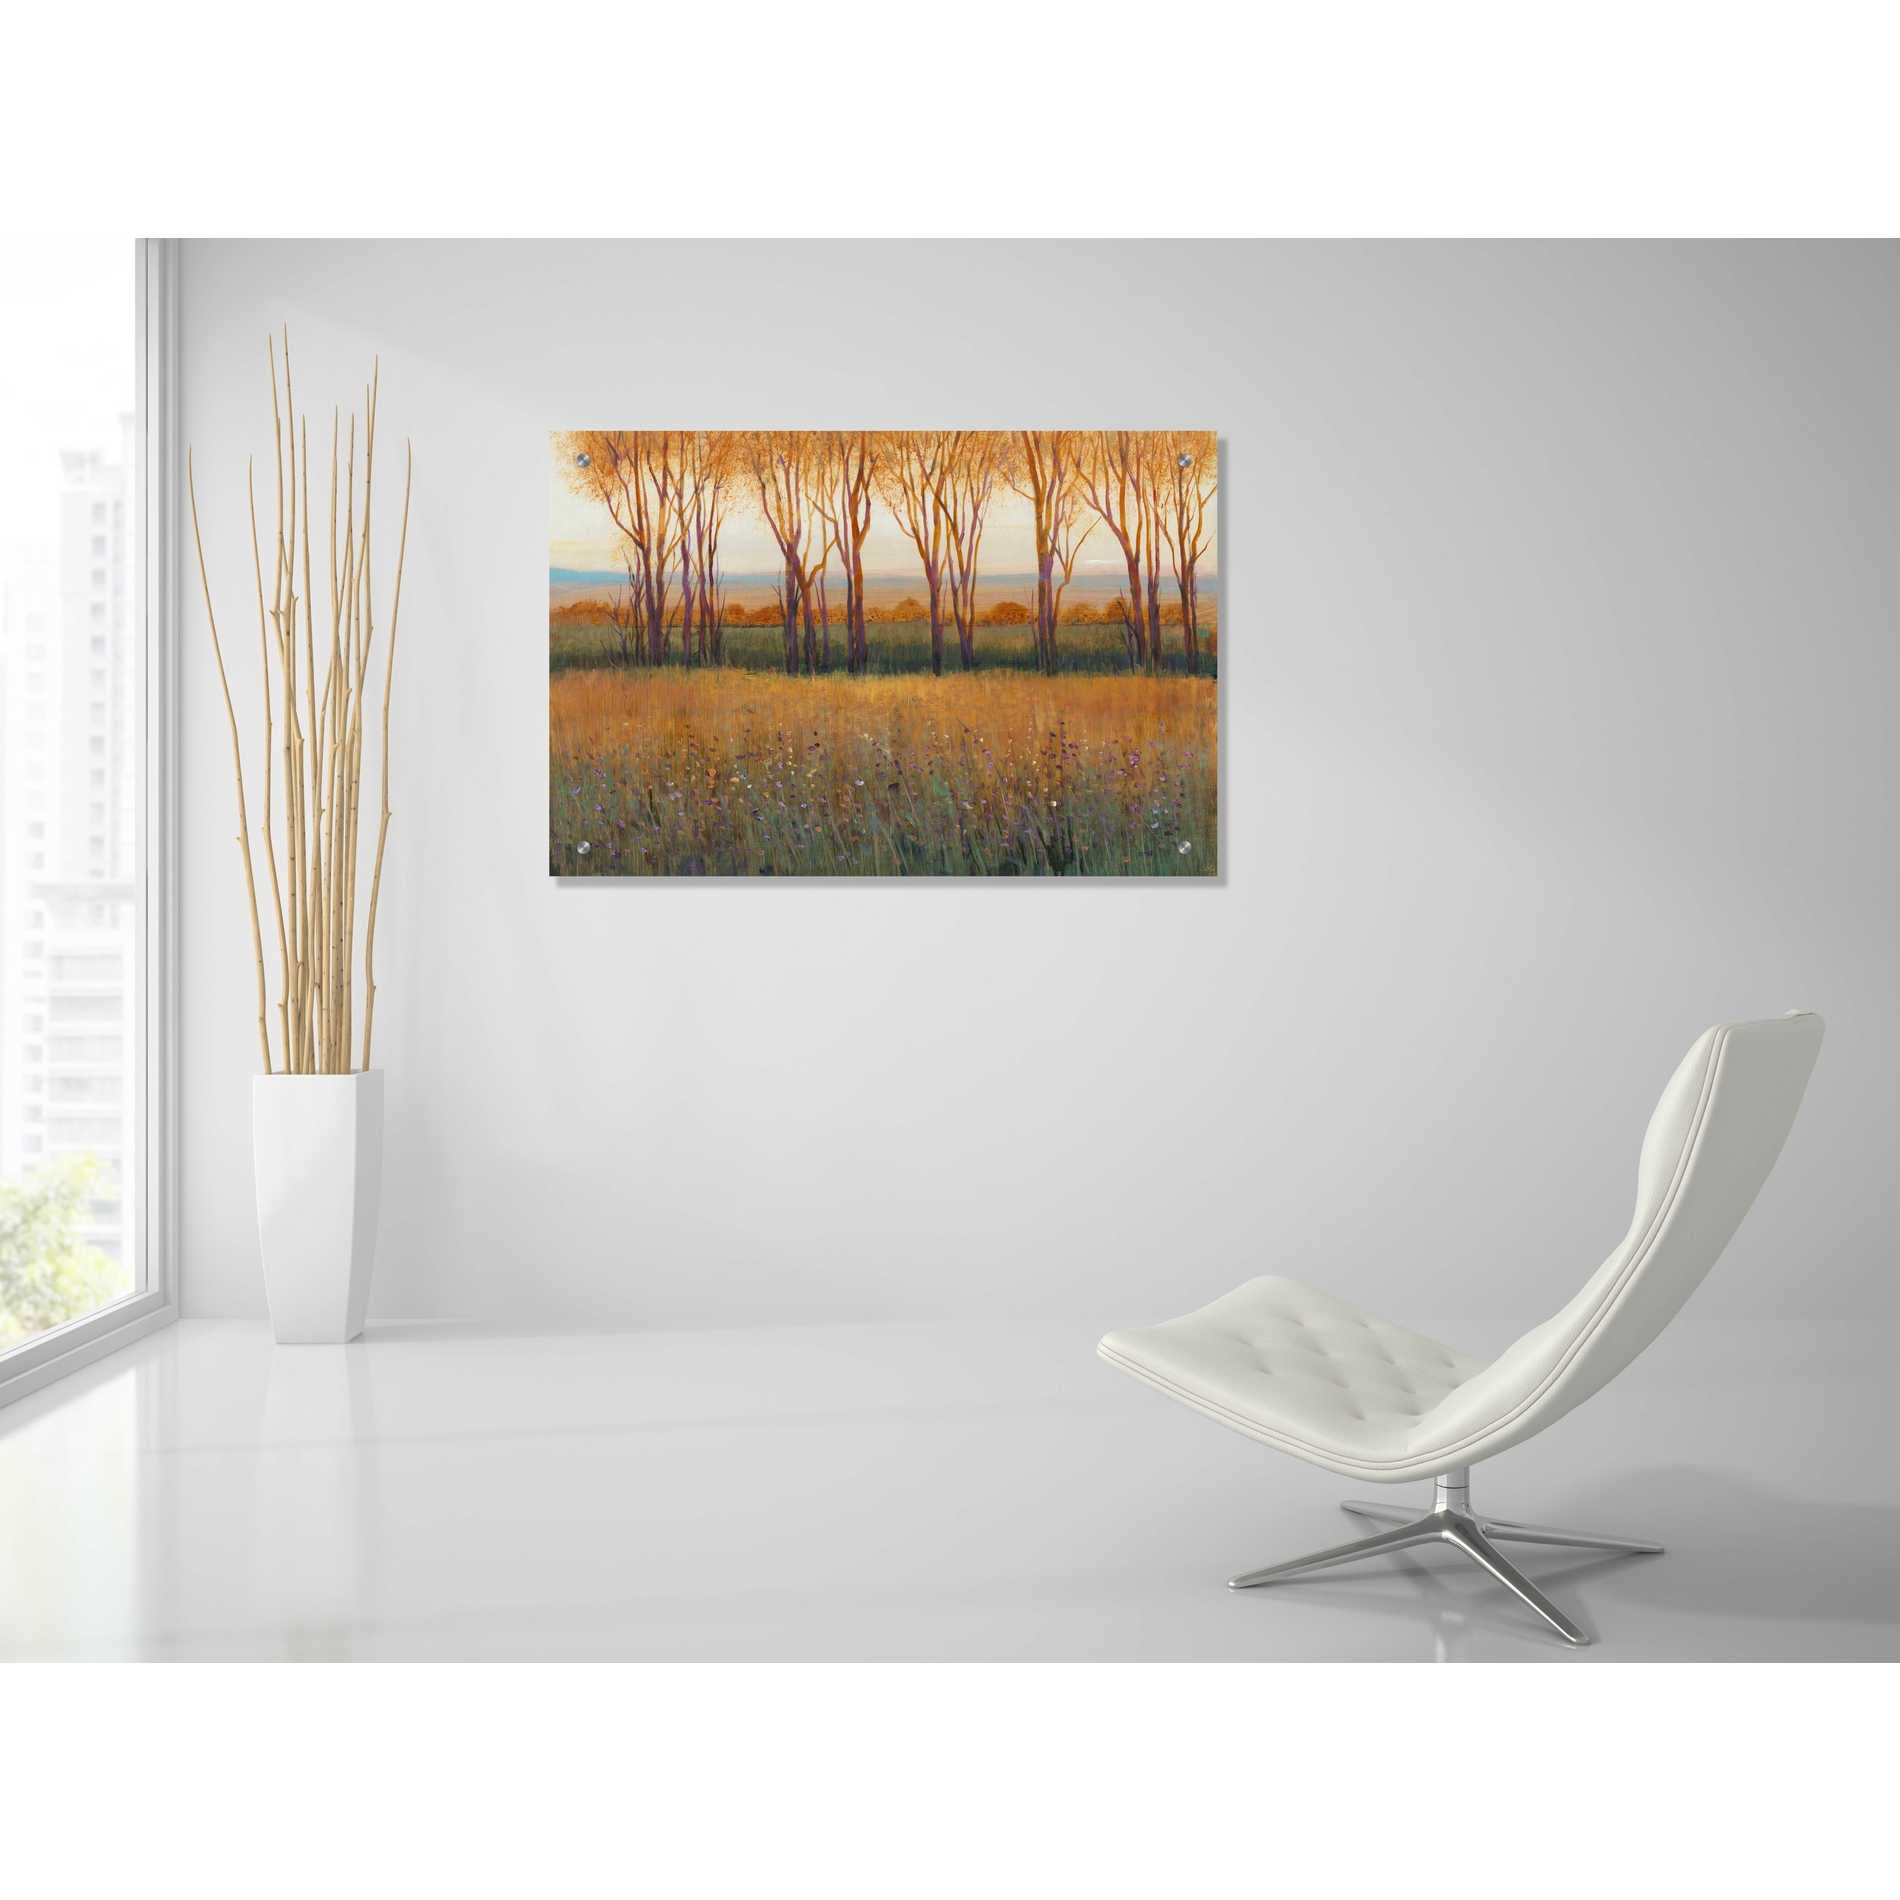 Epic Art 'Glow in the Afternoon II' by Tim O'Toole, Acrylic Glass Wall Art,36x24